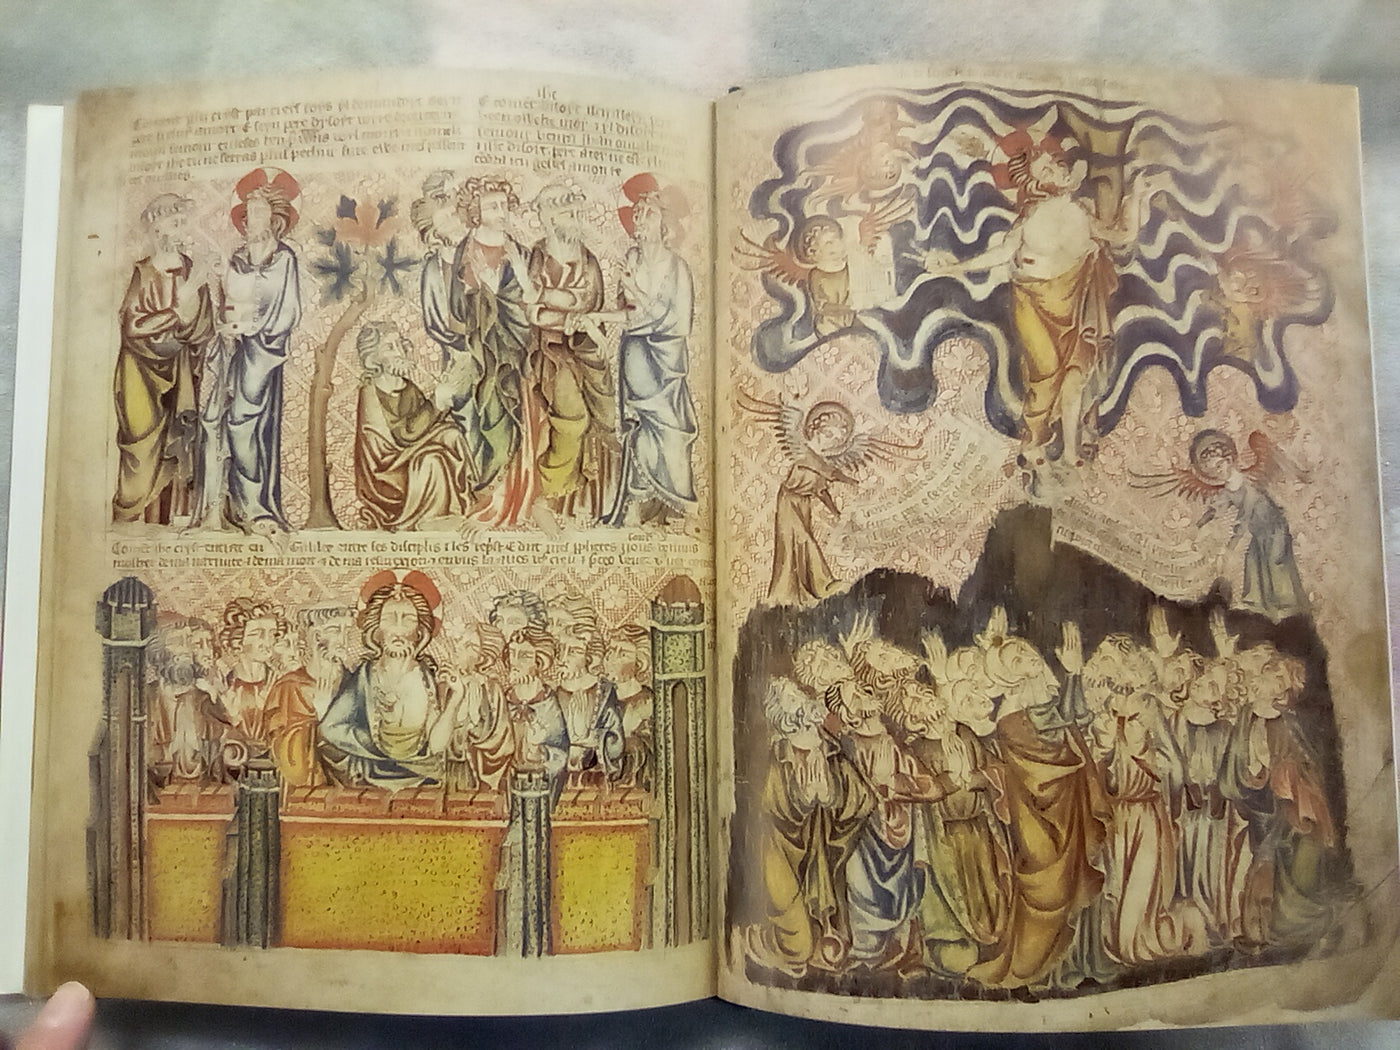 The Holkham Bible - A Facsimile by the British Library